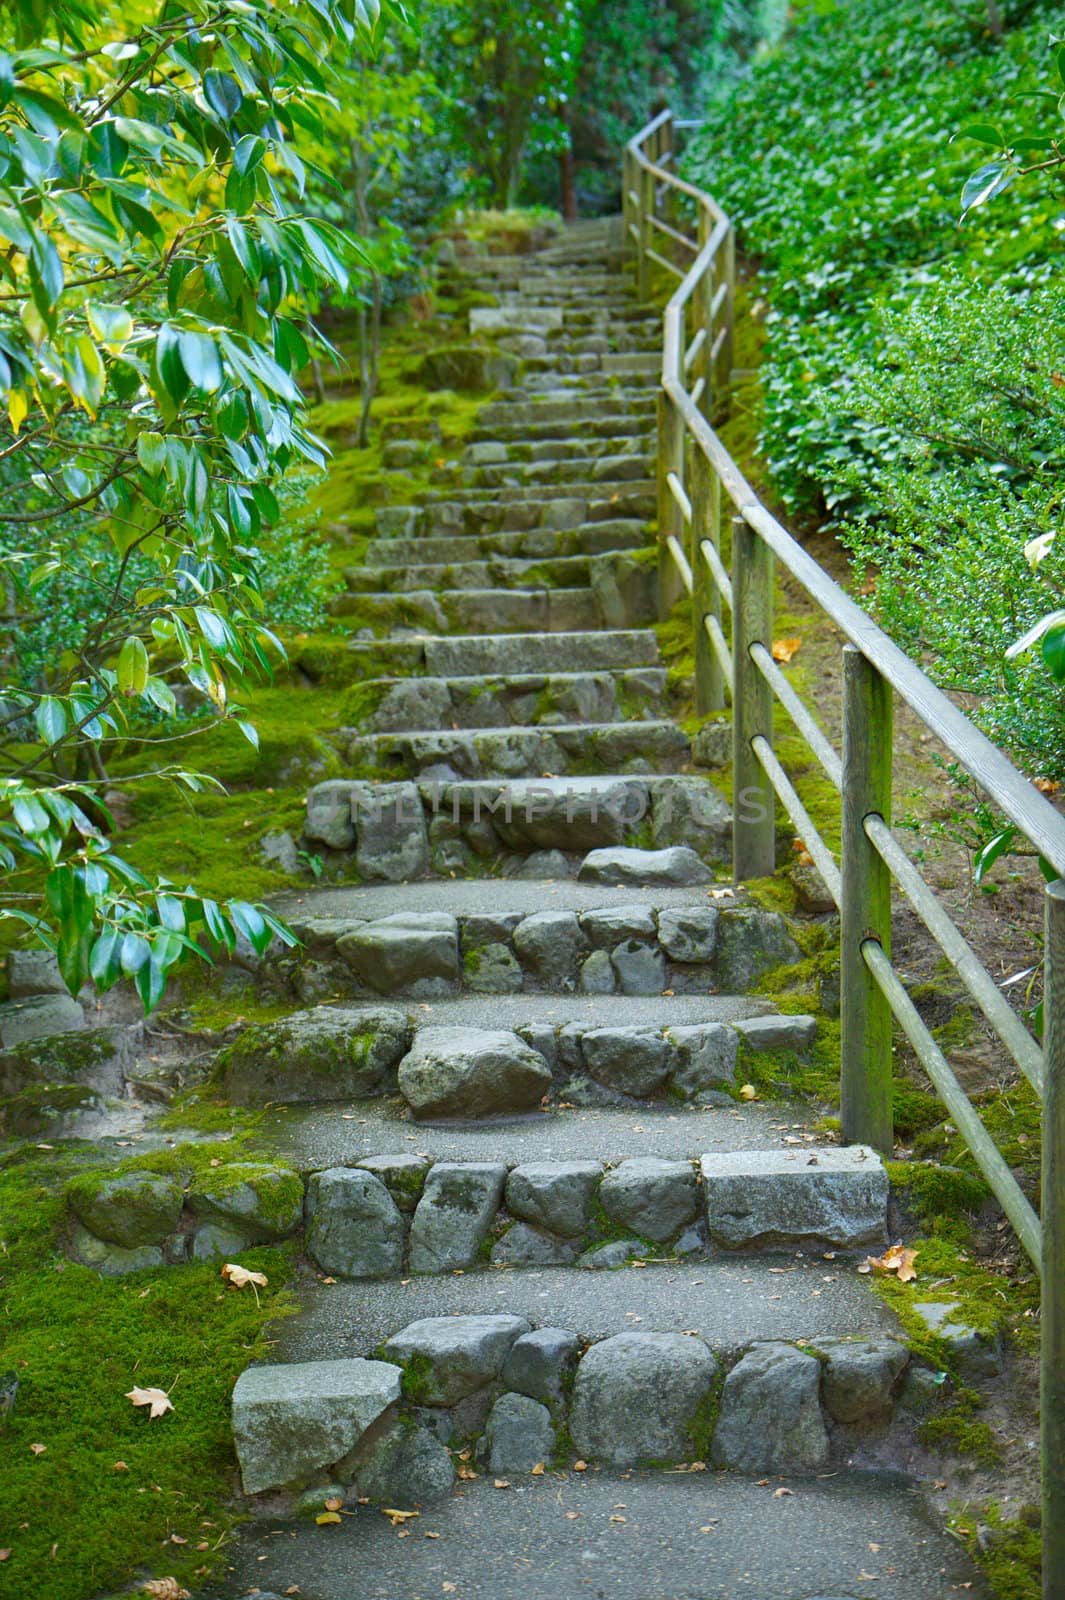 Japanese garden stone staircase covered in moss and surrounded by green foilage